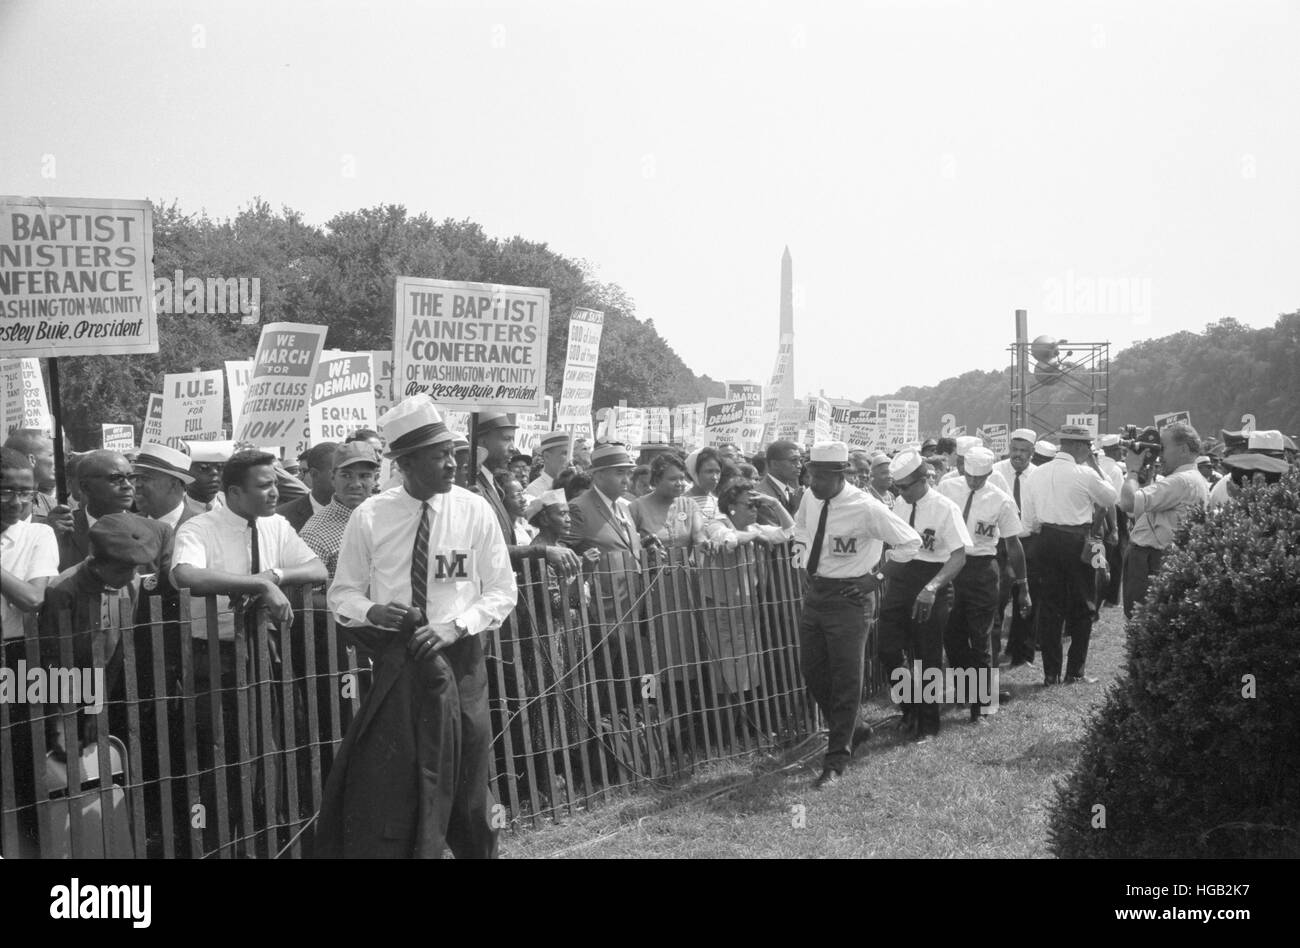 Marshals standing by fence near crowd carrying signs during the March on Washington, 1963 Stock Photo